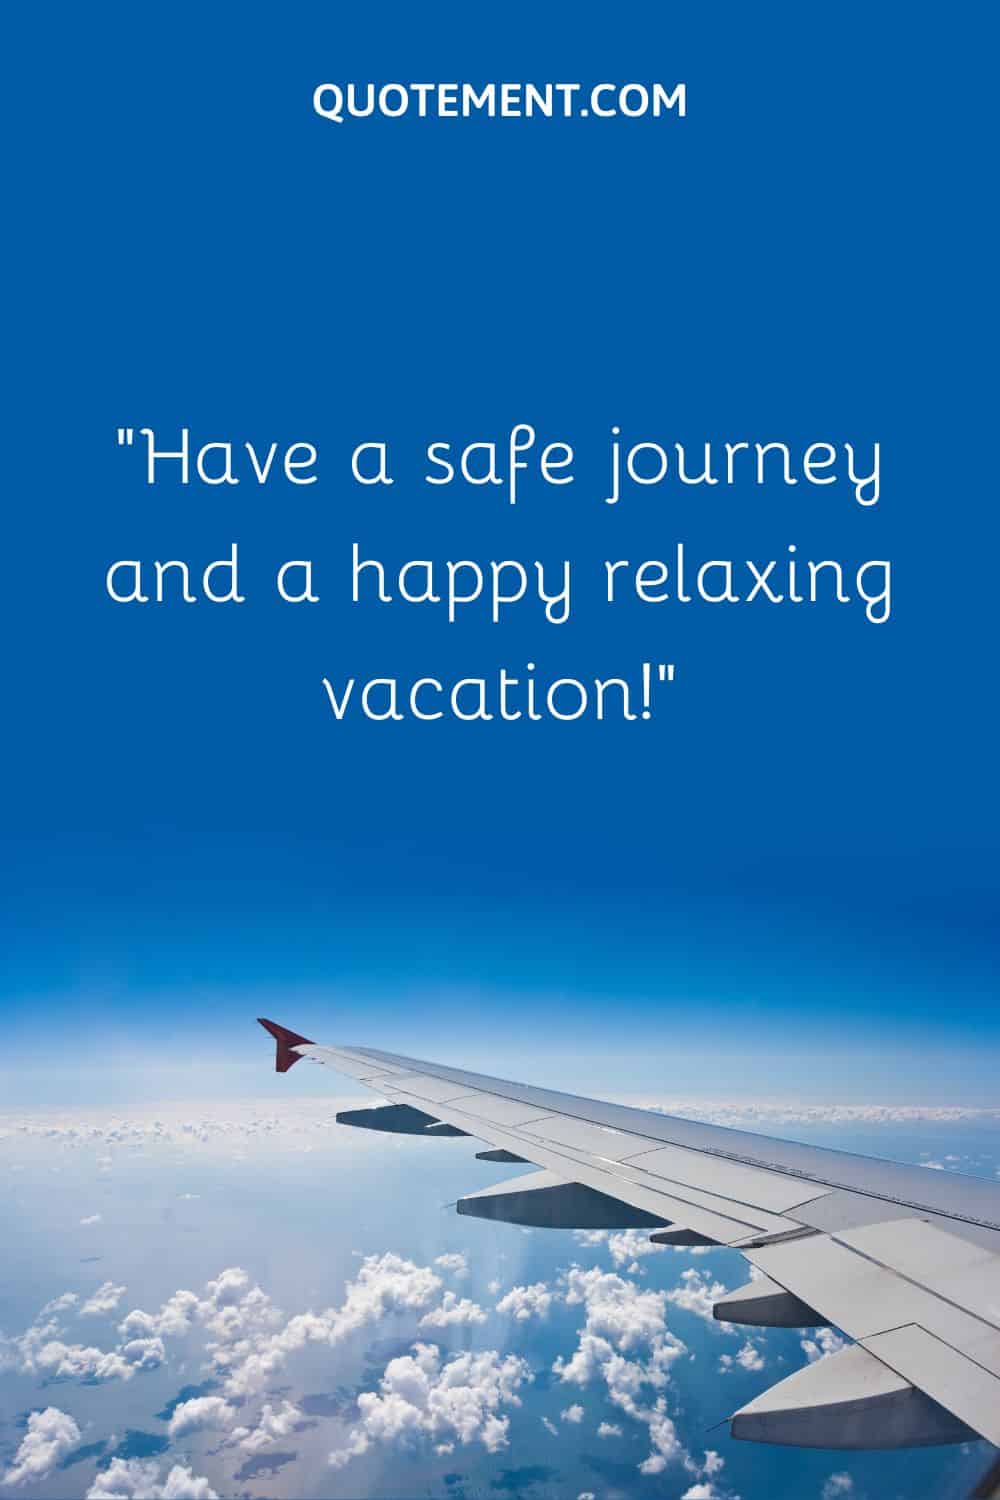 Have a safe journey and a happy relaxing vacation